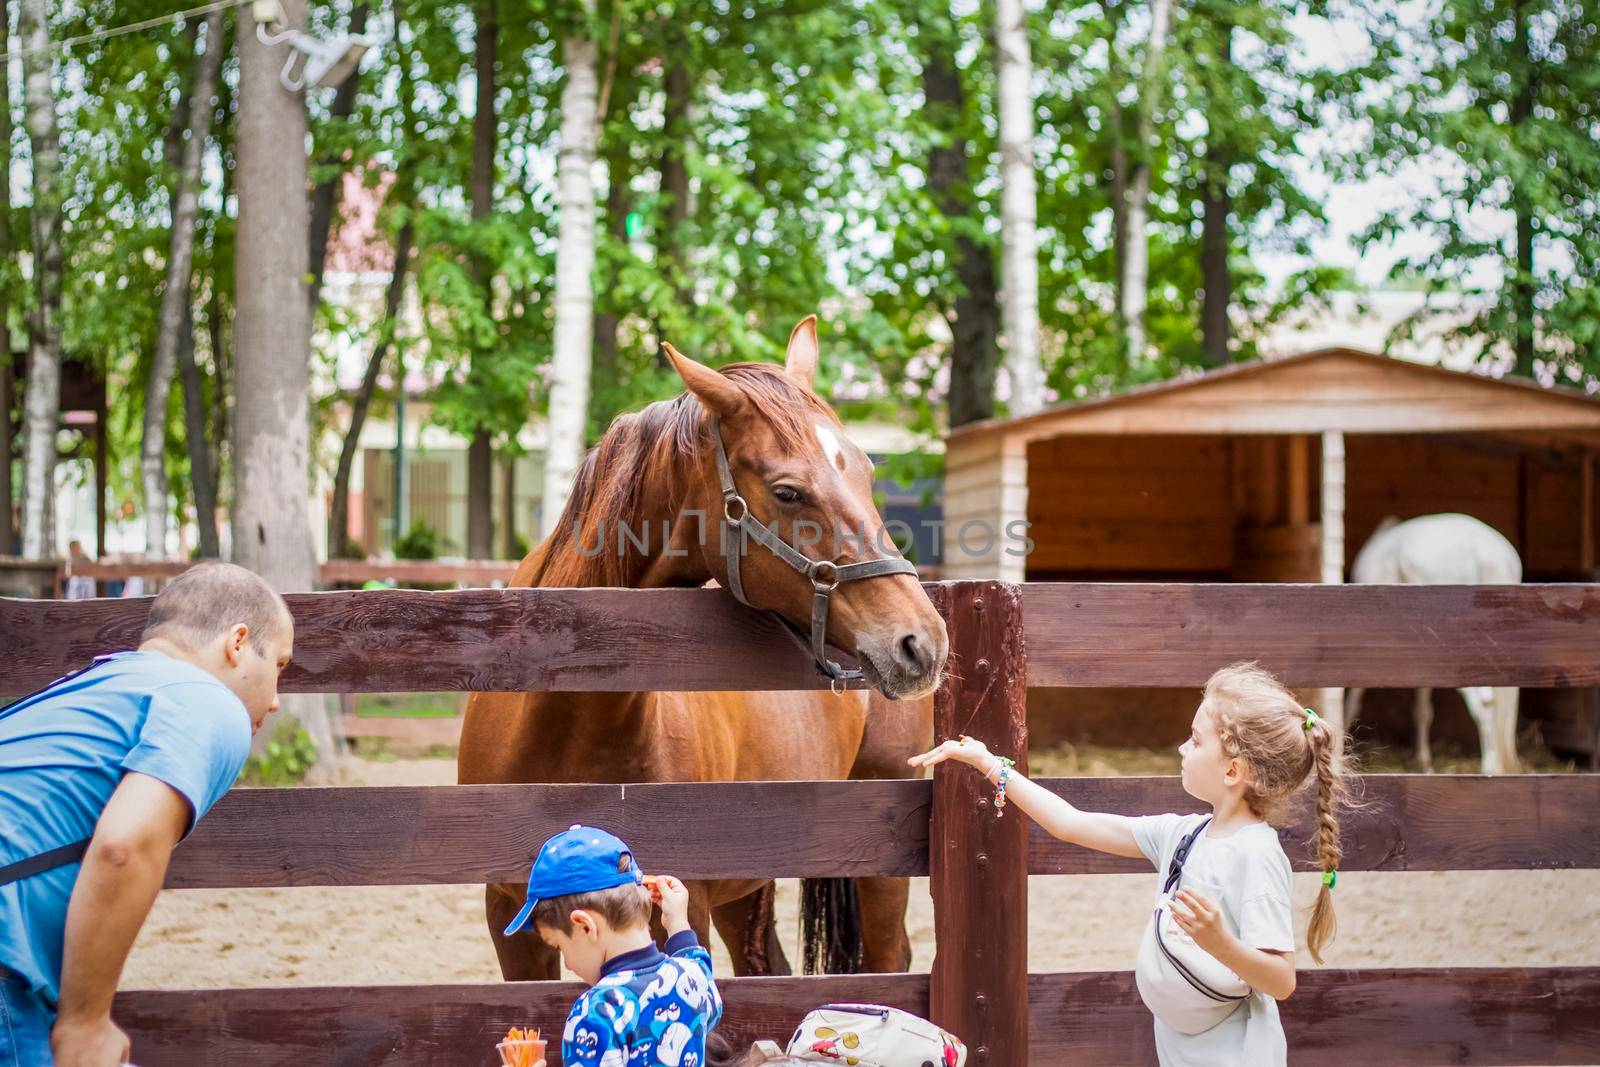 2022-06-19, Russia, Moscow, Animals in an aviary in a small city zoo. Animals are fed from the hands of visitors, and children can pet them. Horse, sheep, sheep, animals